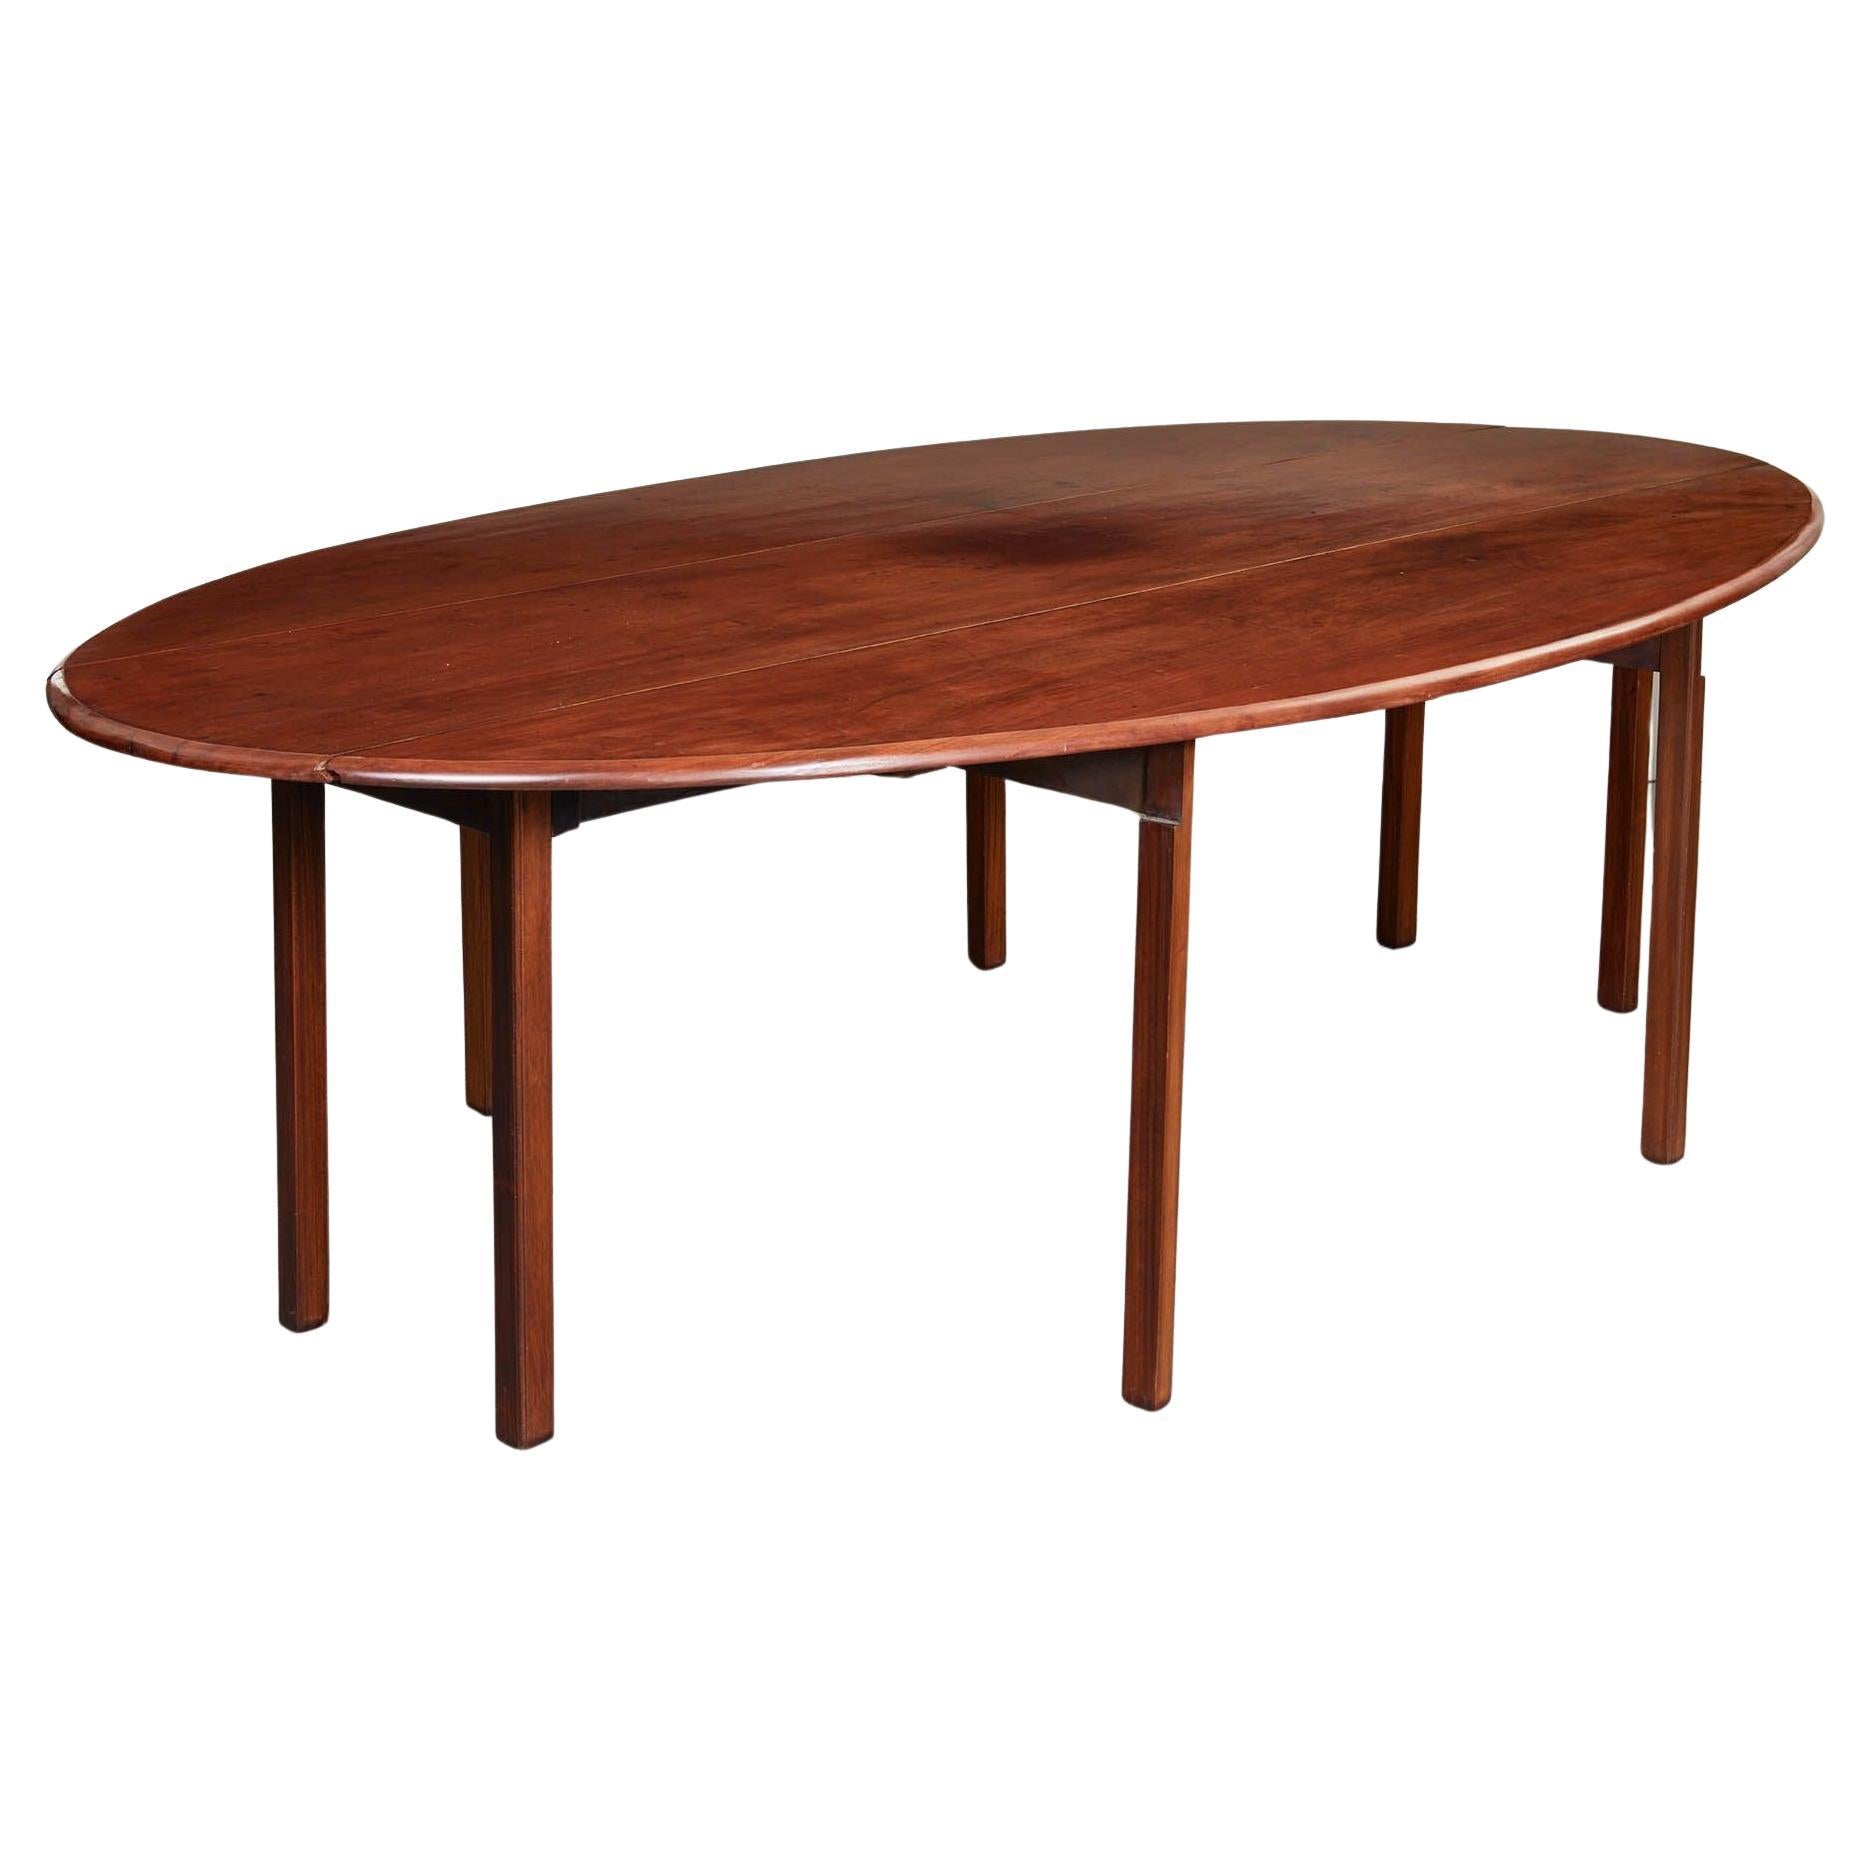 A large 19th century folding leaf table, known as a hunt table, made of excellent quality mahogany timber and possessing great mellow color. Elegant and simple design with eased ogee edge all round oval top, with four square section legs to center